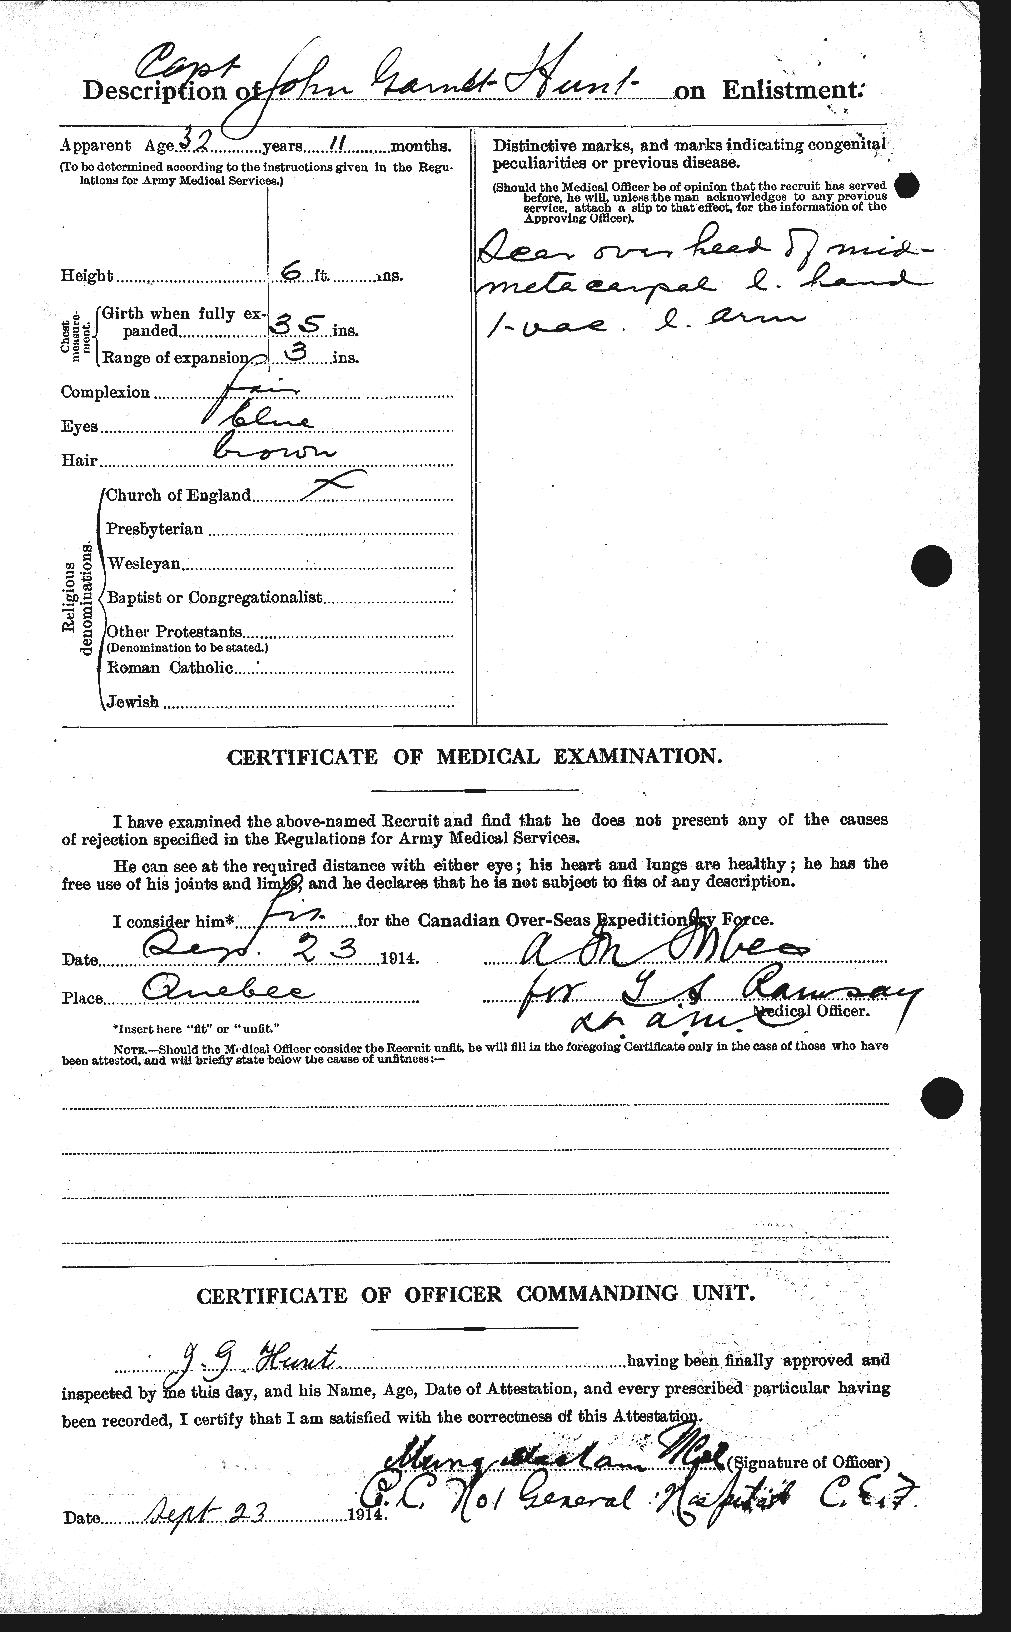 Personnel Records of the First World War - CEF 407630b